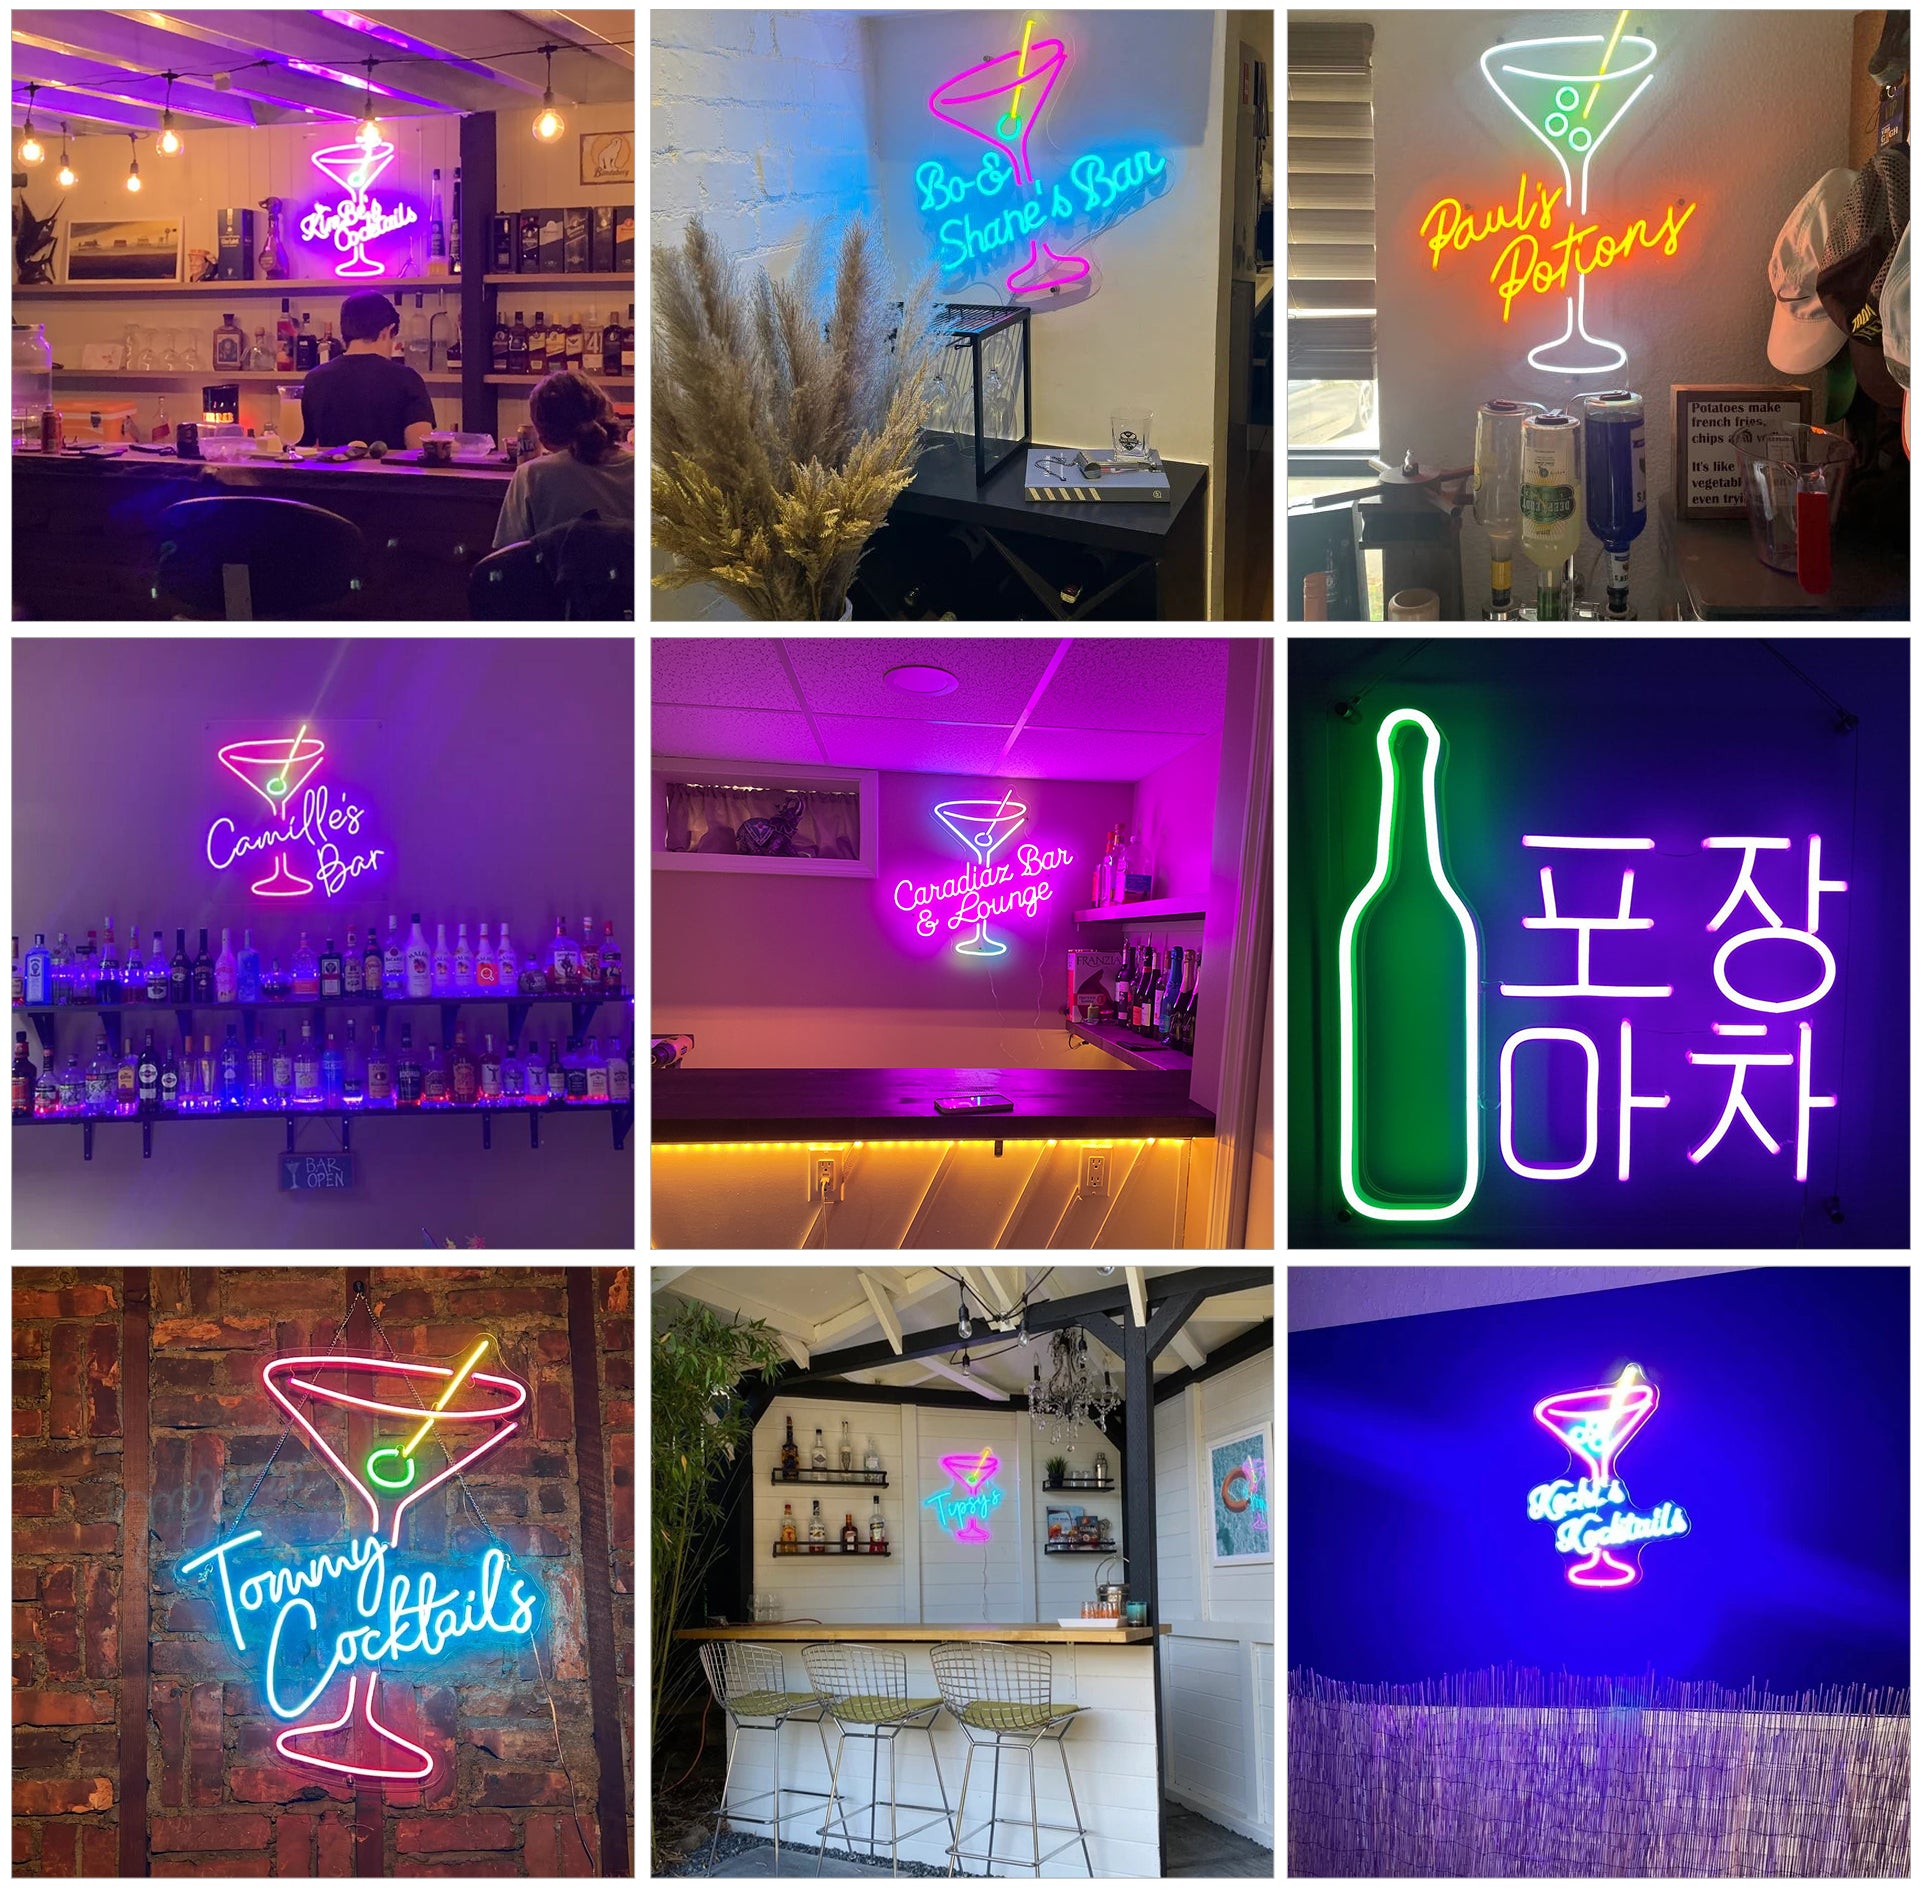 cocktails neon sign